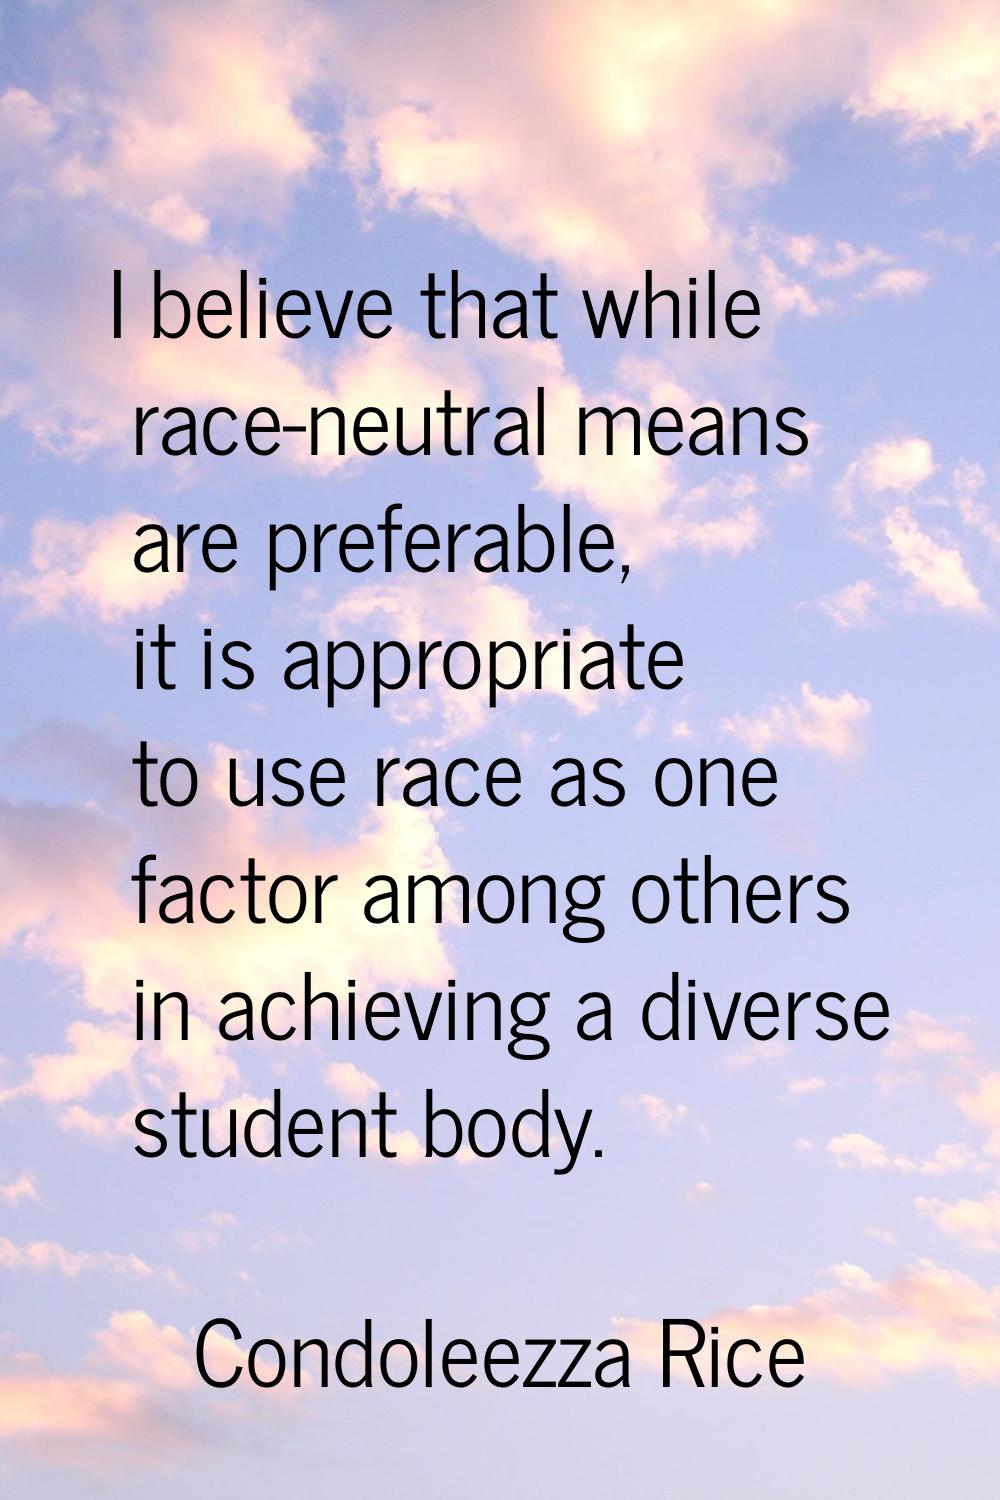 I believe that while race-neutral means are preferable, it is appropriate to use race as one factor